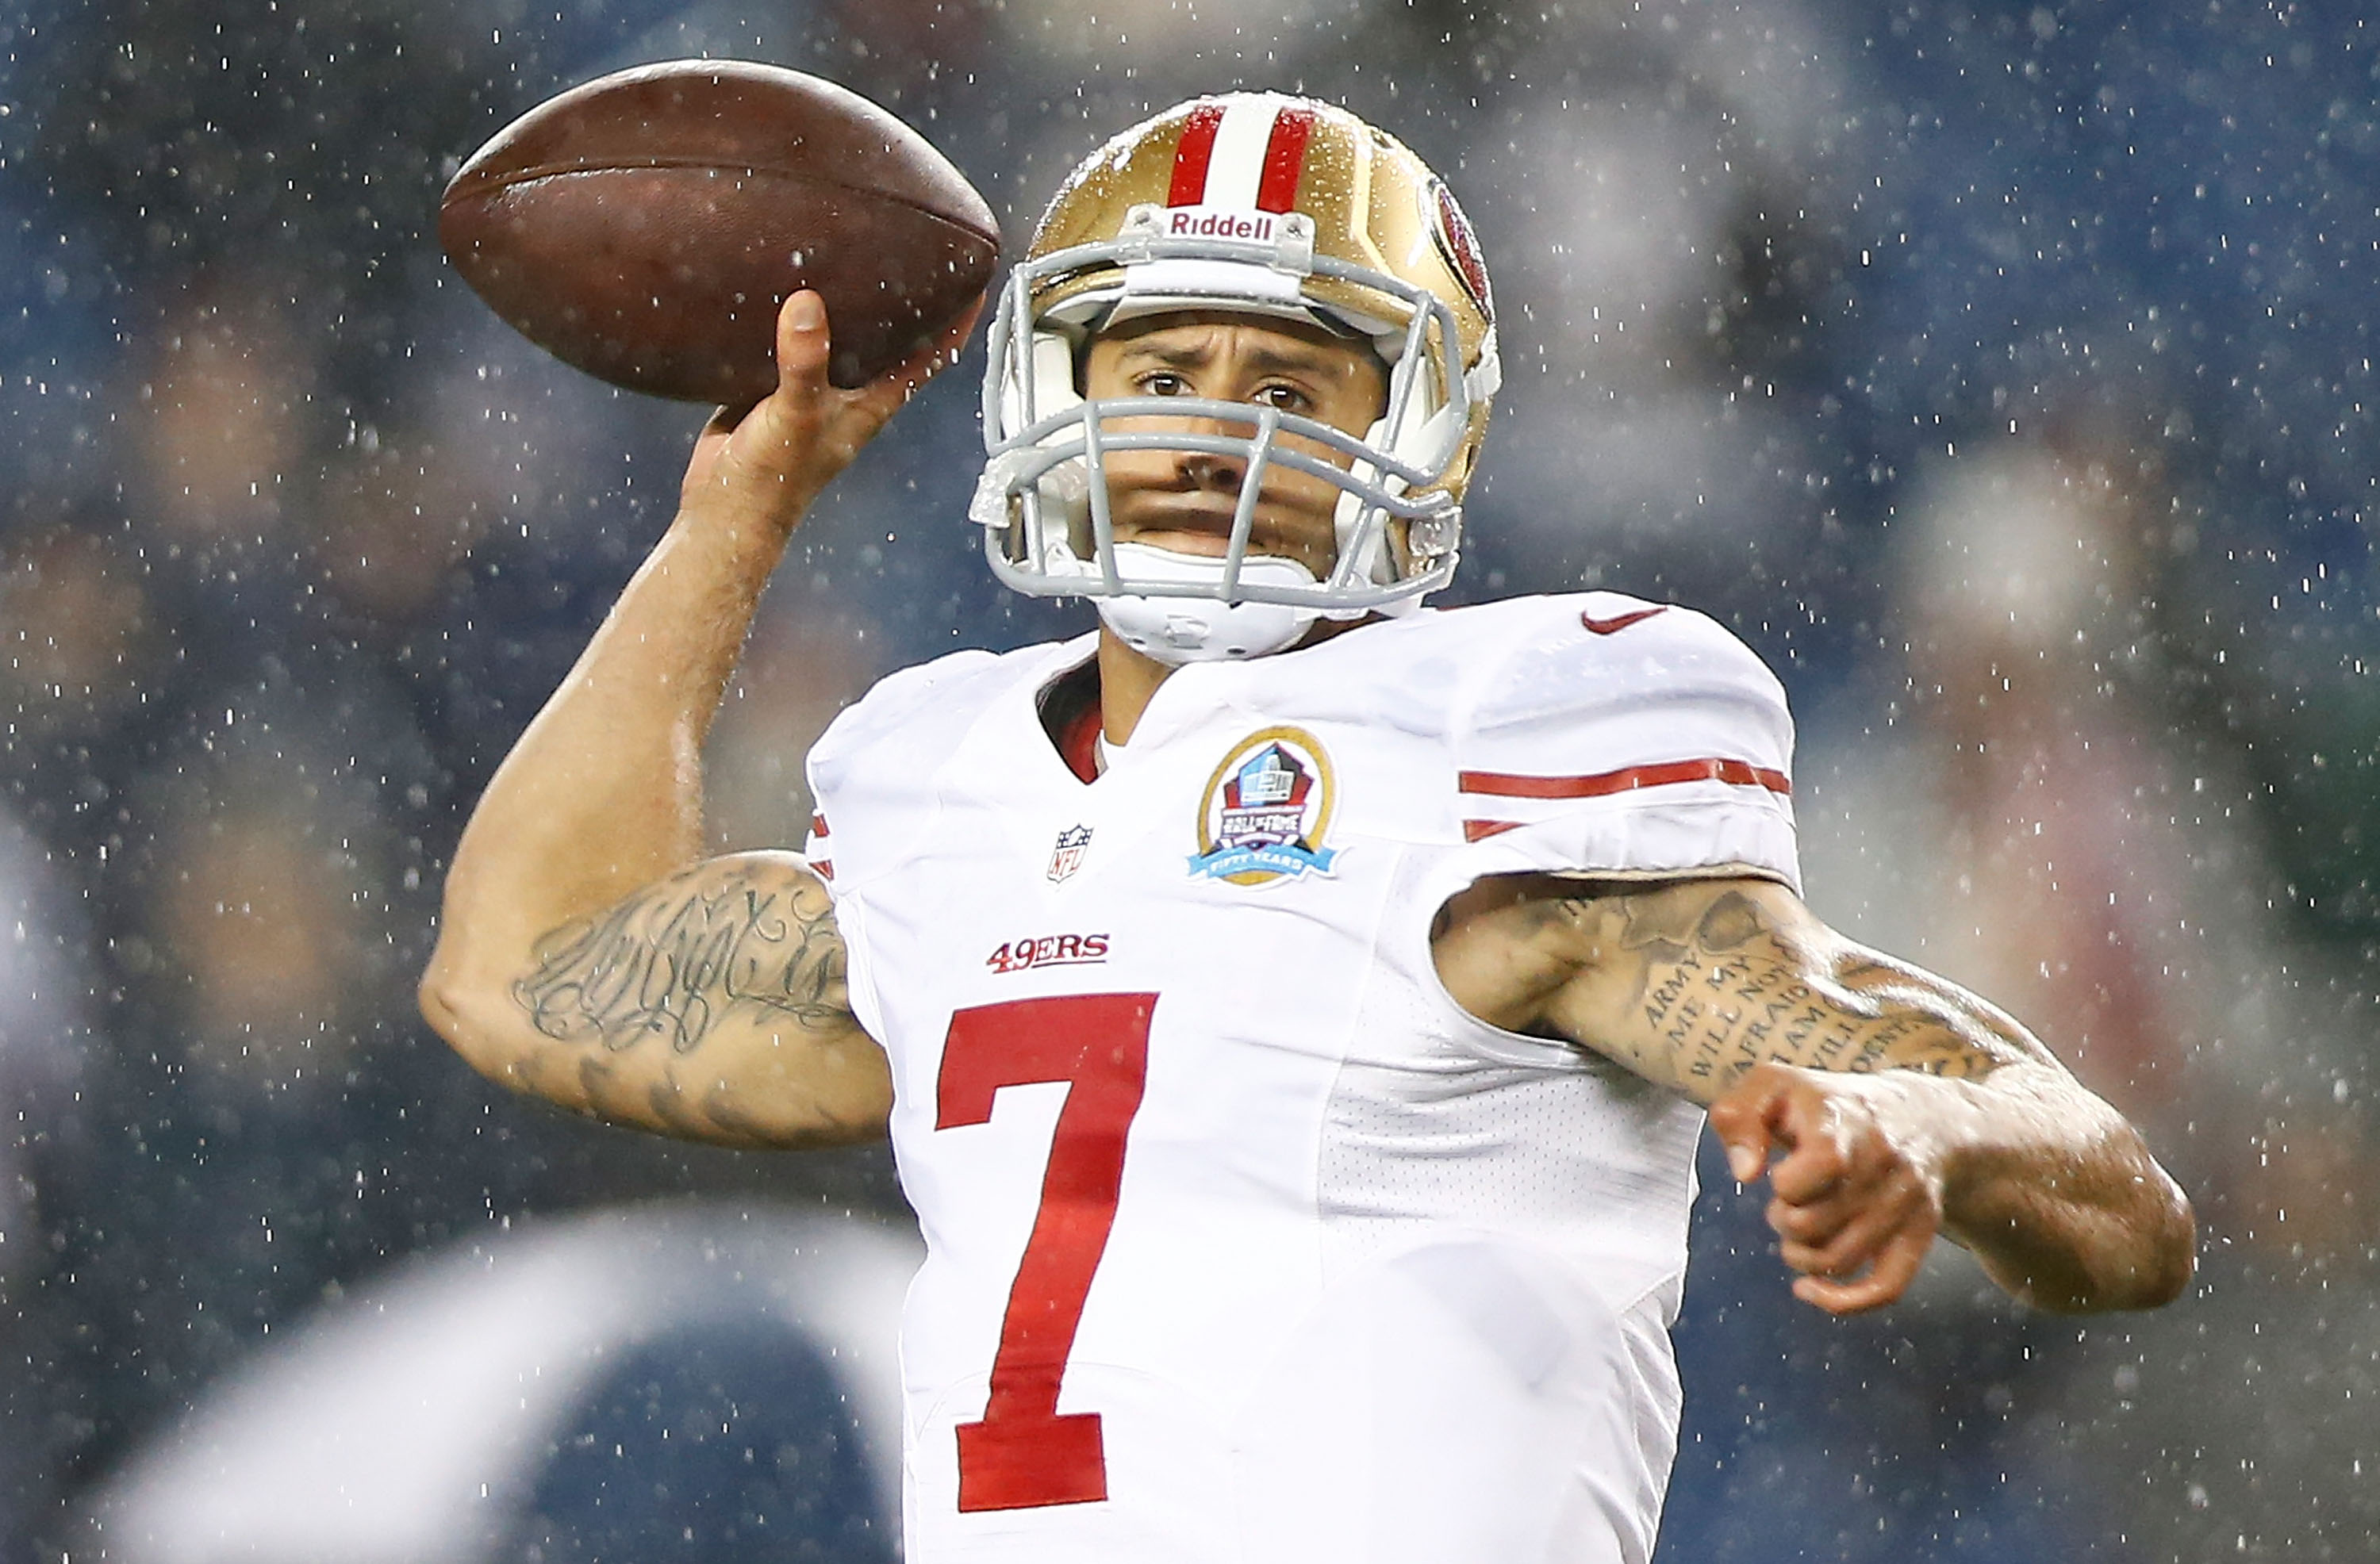 Cris Collinsworth Says That Colin Kaepernick Played 1 of the Best Games He’s Ever Seen